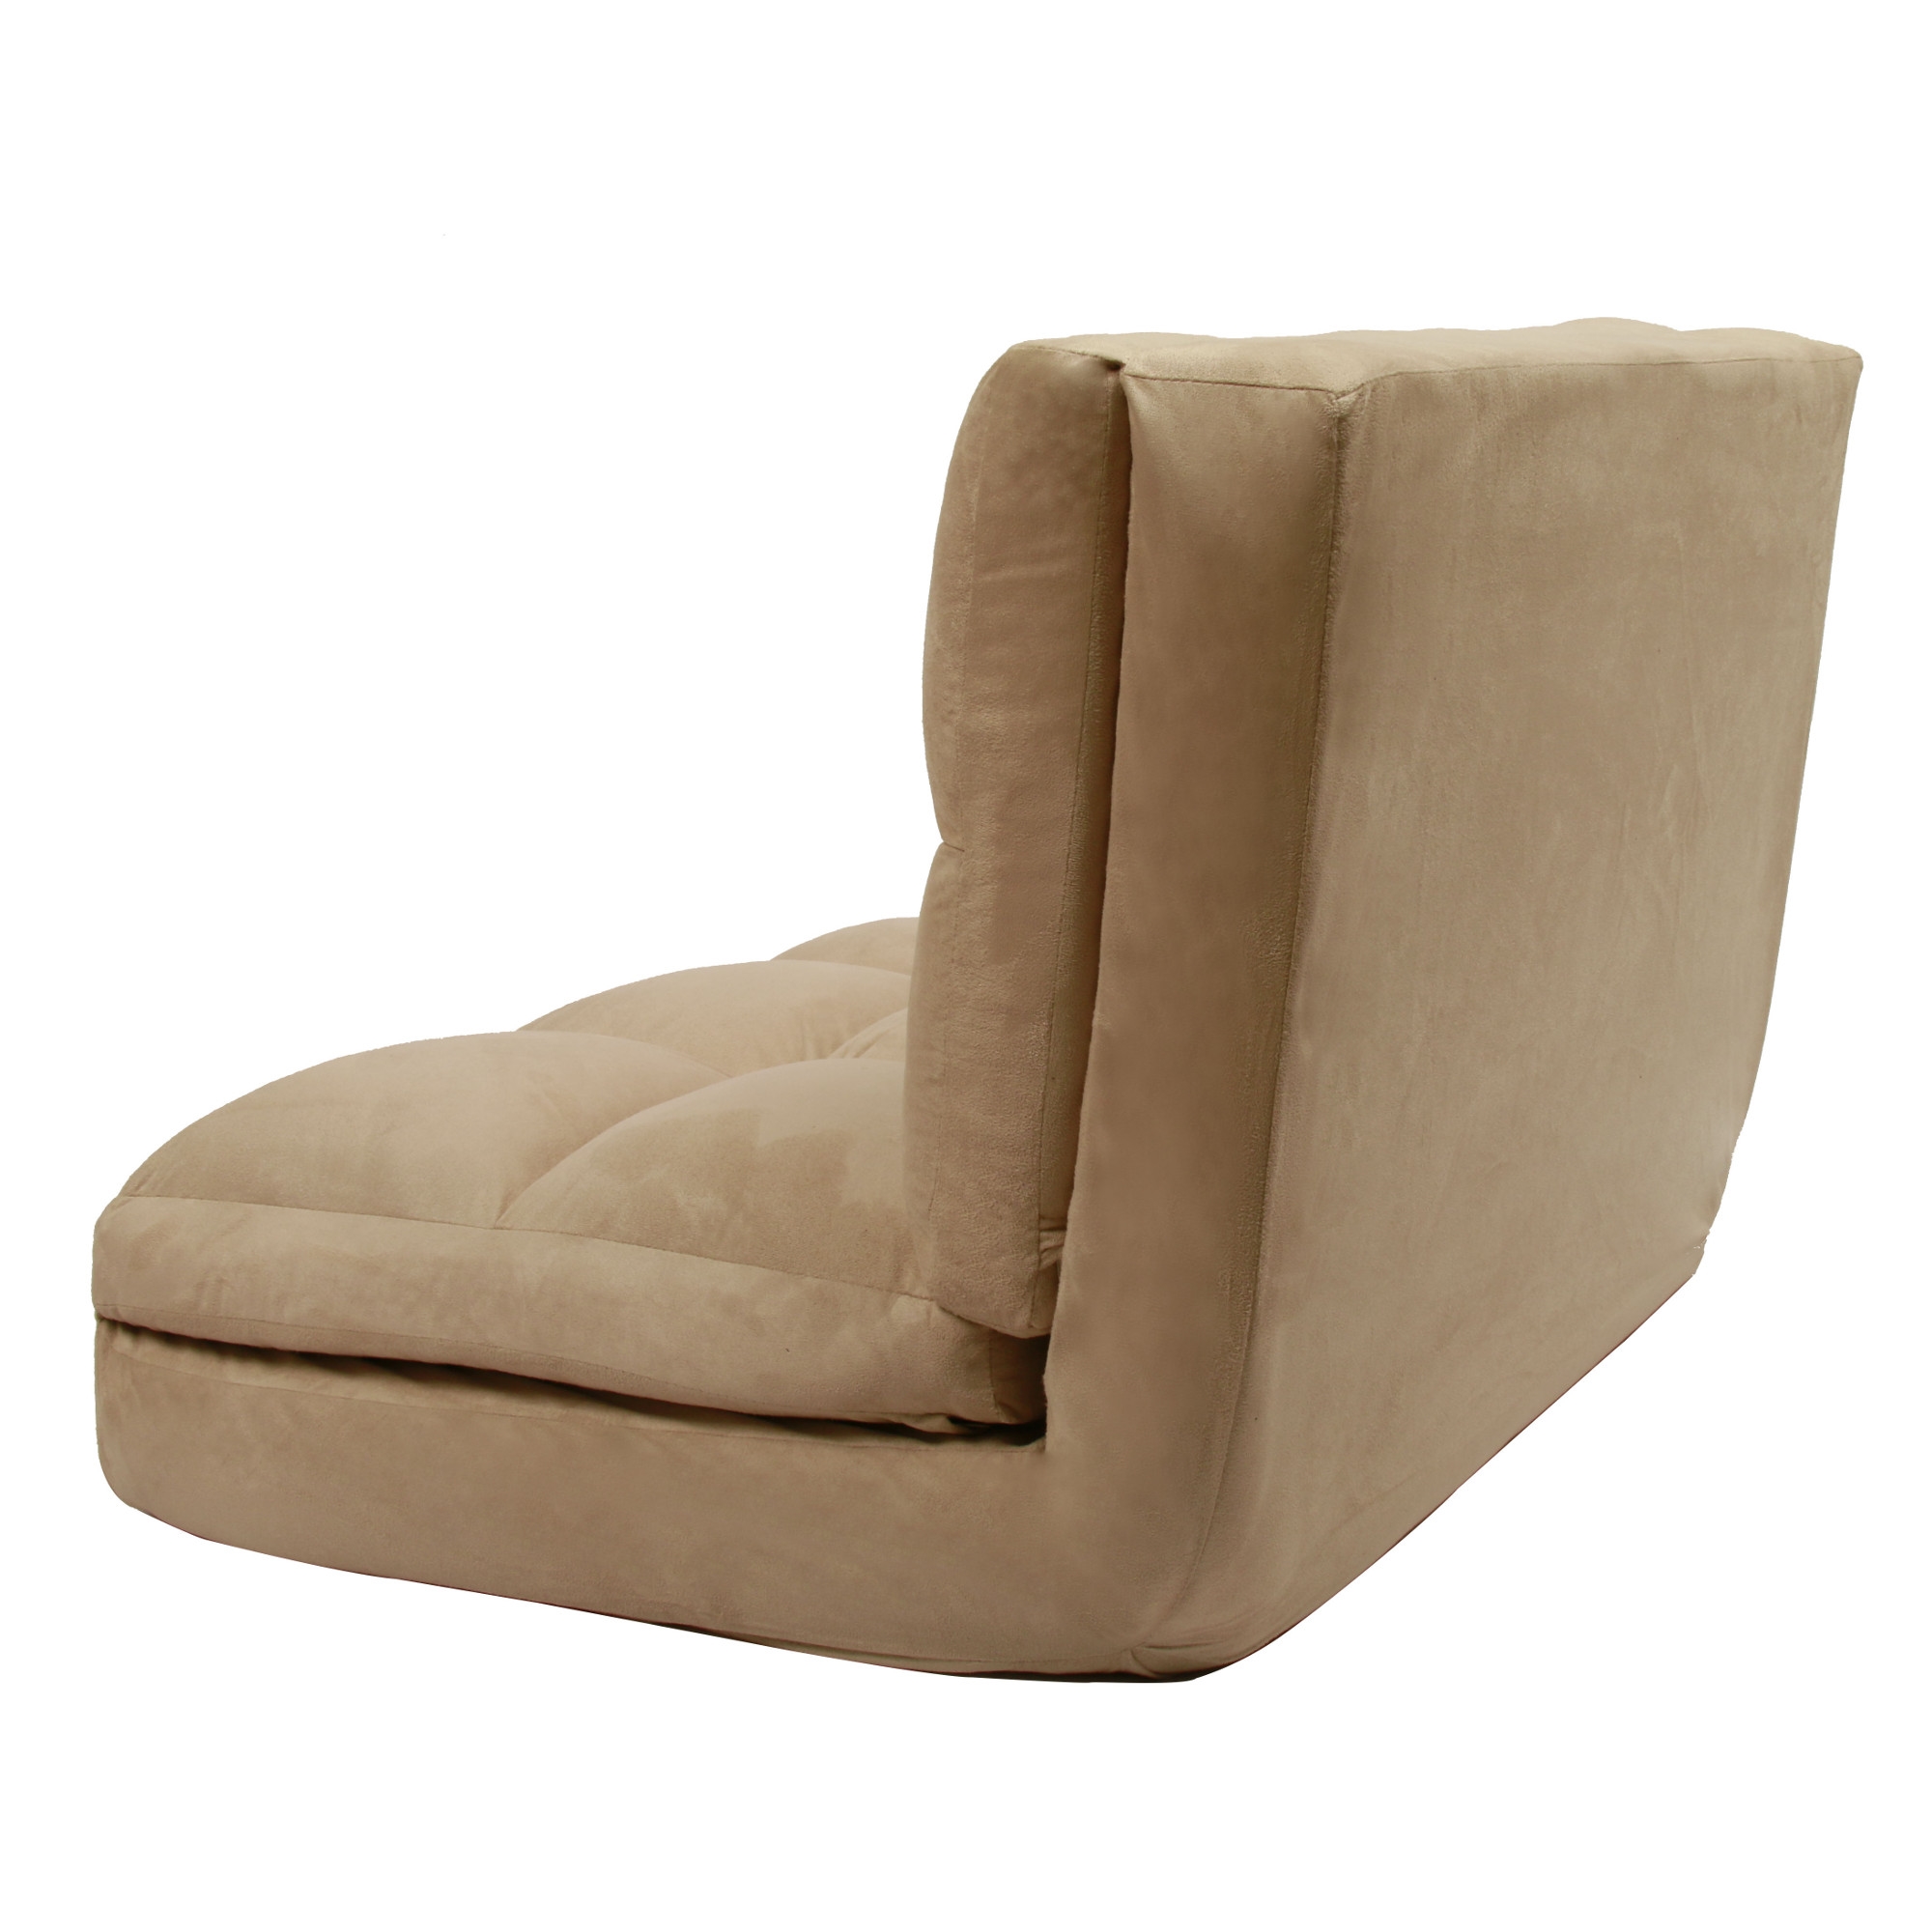 Loungie Microsuede Flip Chair Lounger Seat Beige - image 5 of 9